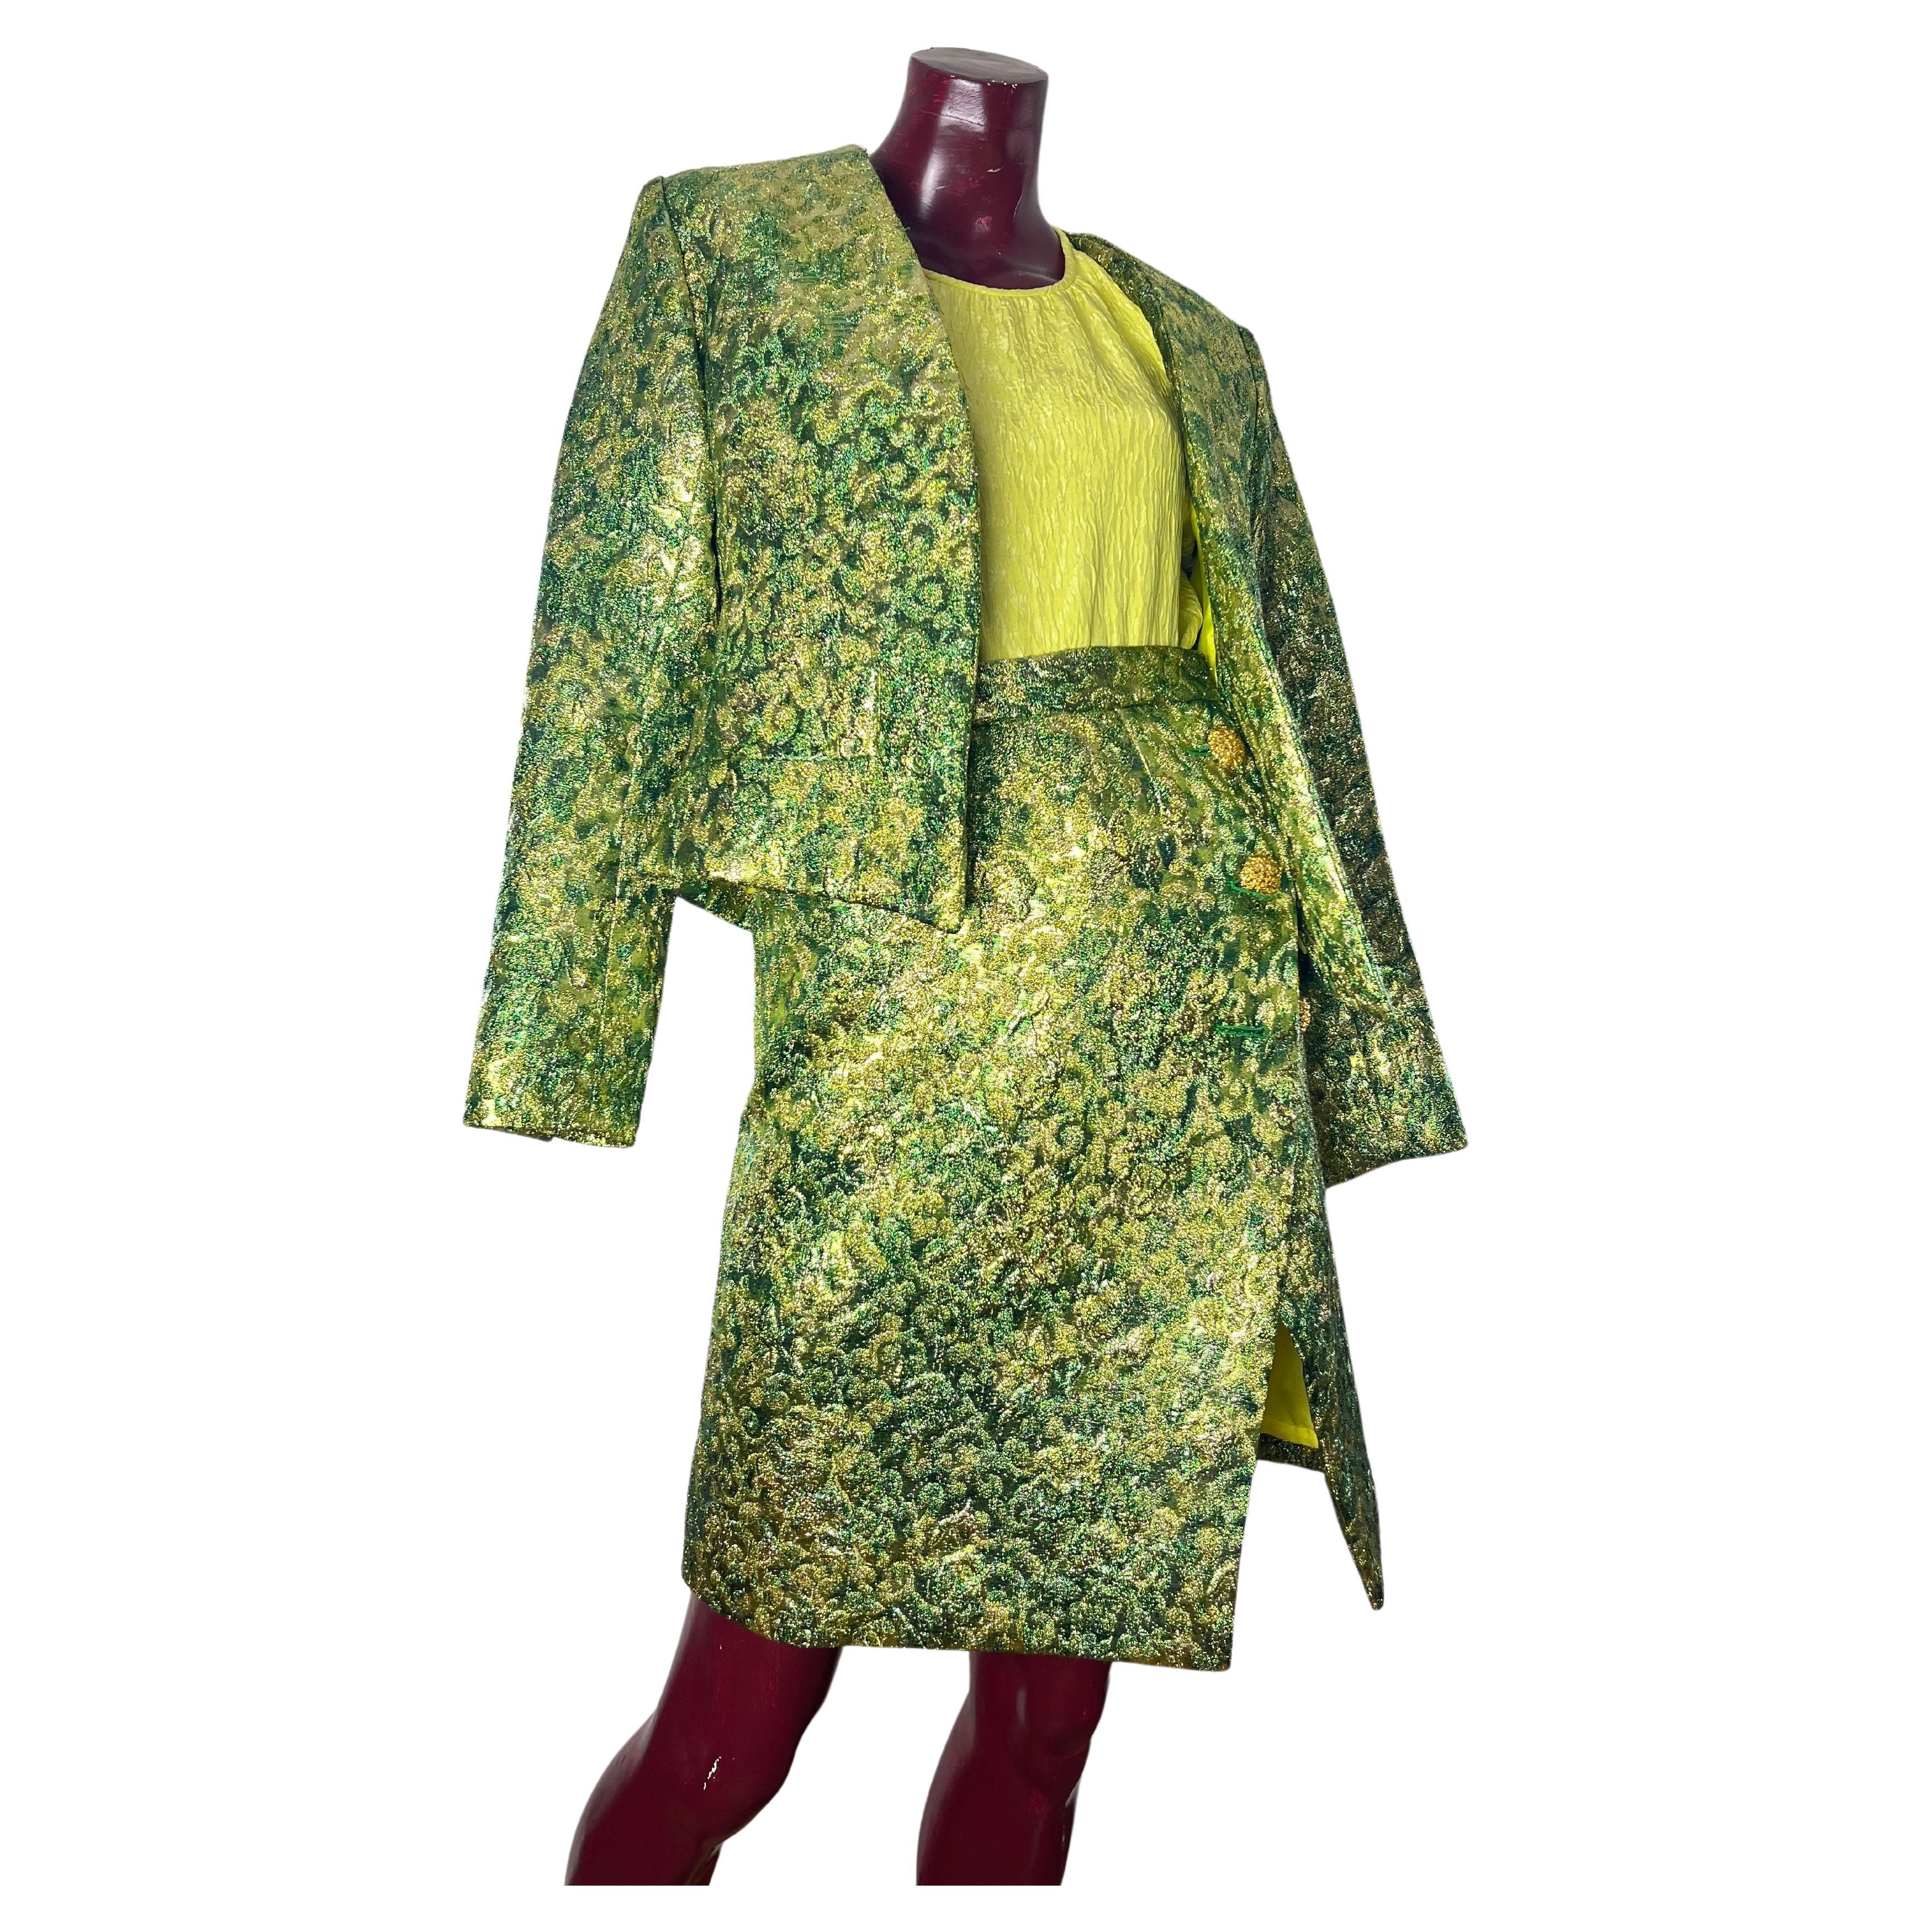 YSL green/yellow brocade suit For Sale